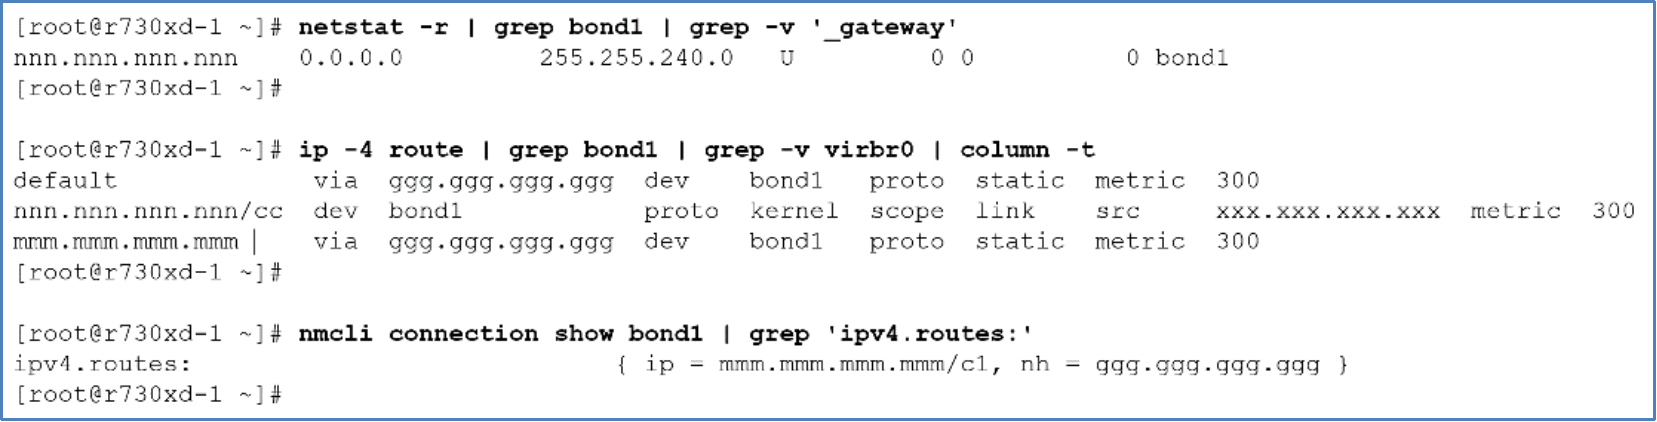 This diagram shows the output of LInux's "netstat -r", "ip -4 route", and nmcli connection show device" commands. The output shows that a static route is used for interface bond1.